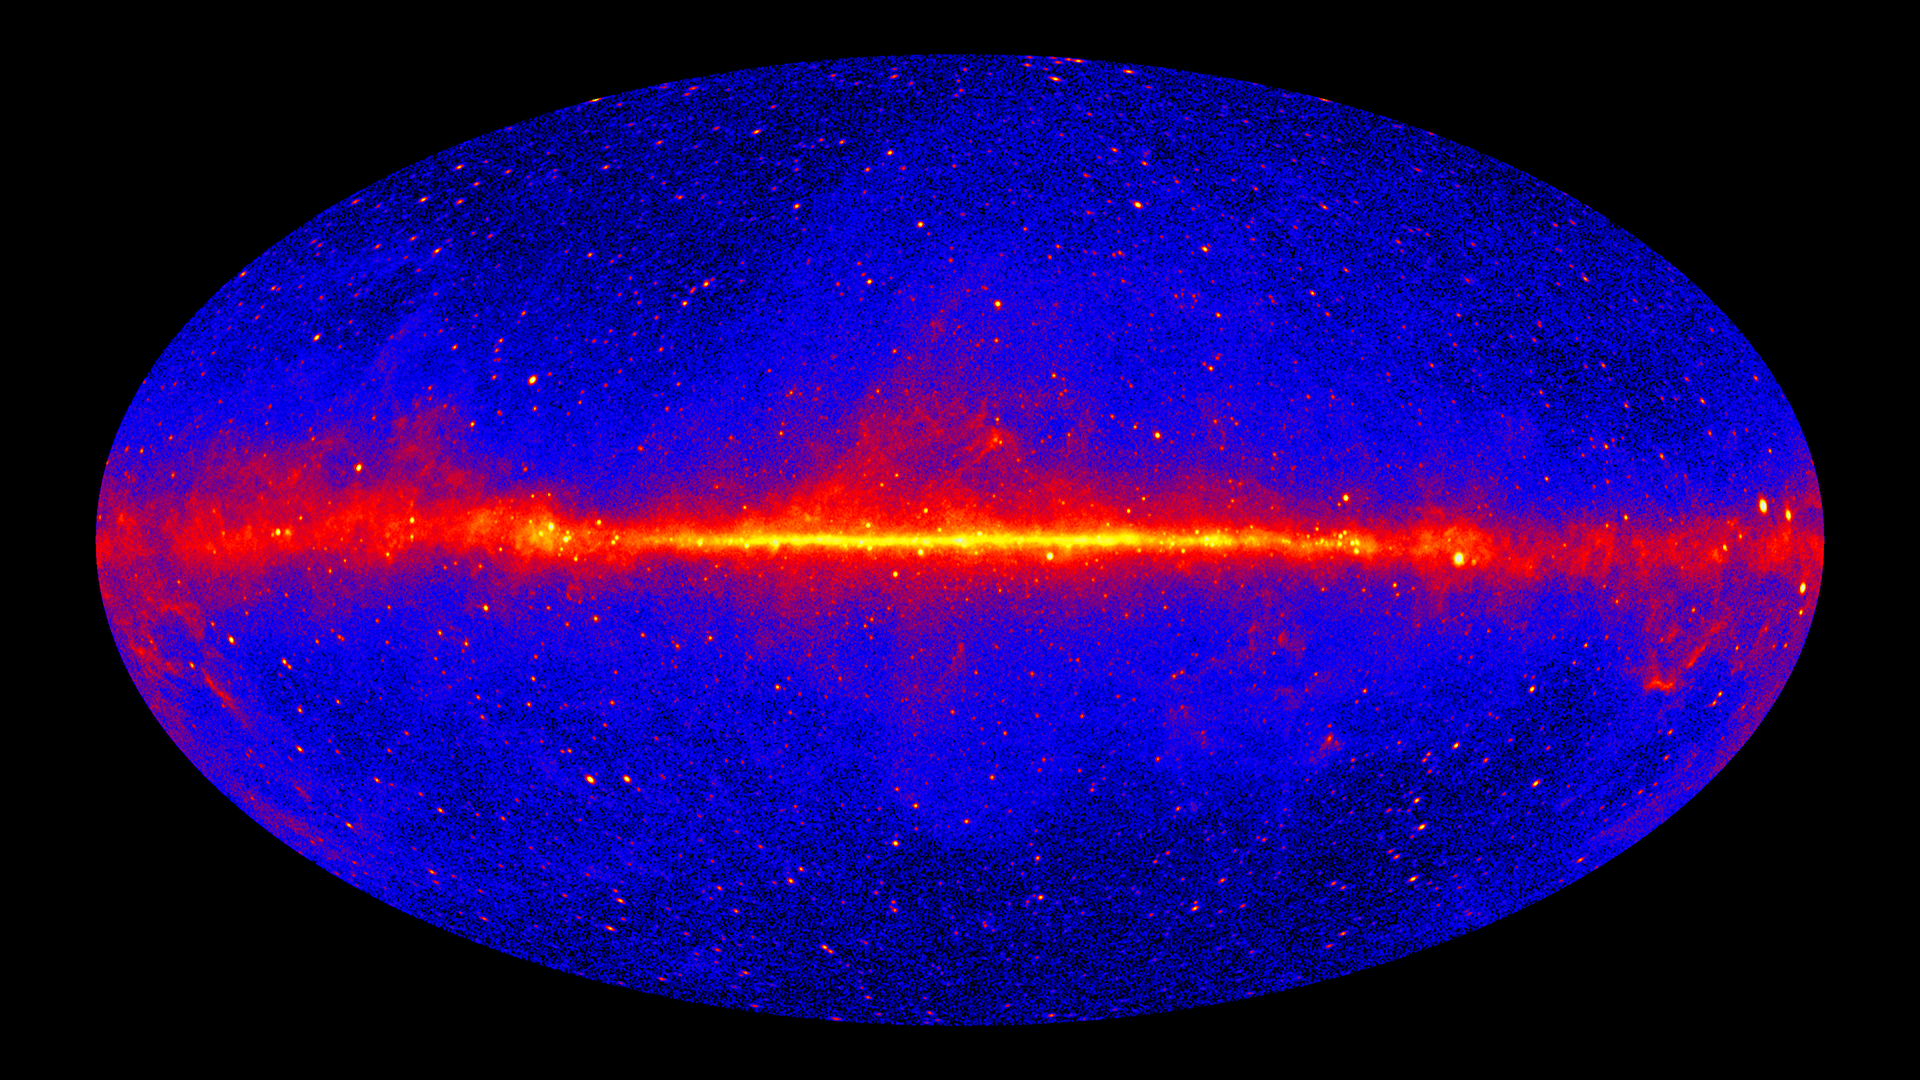 Fermi-LAT collaboration has released the updated list of cosmic gamma-ray sources to date